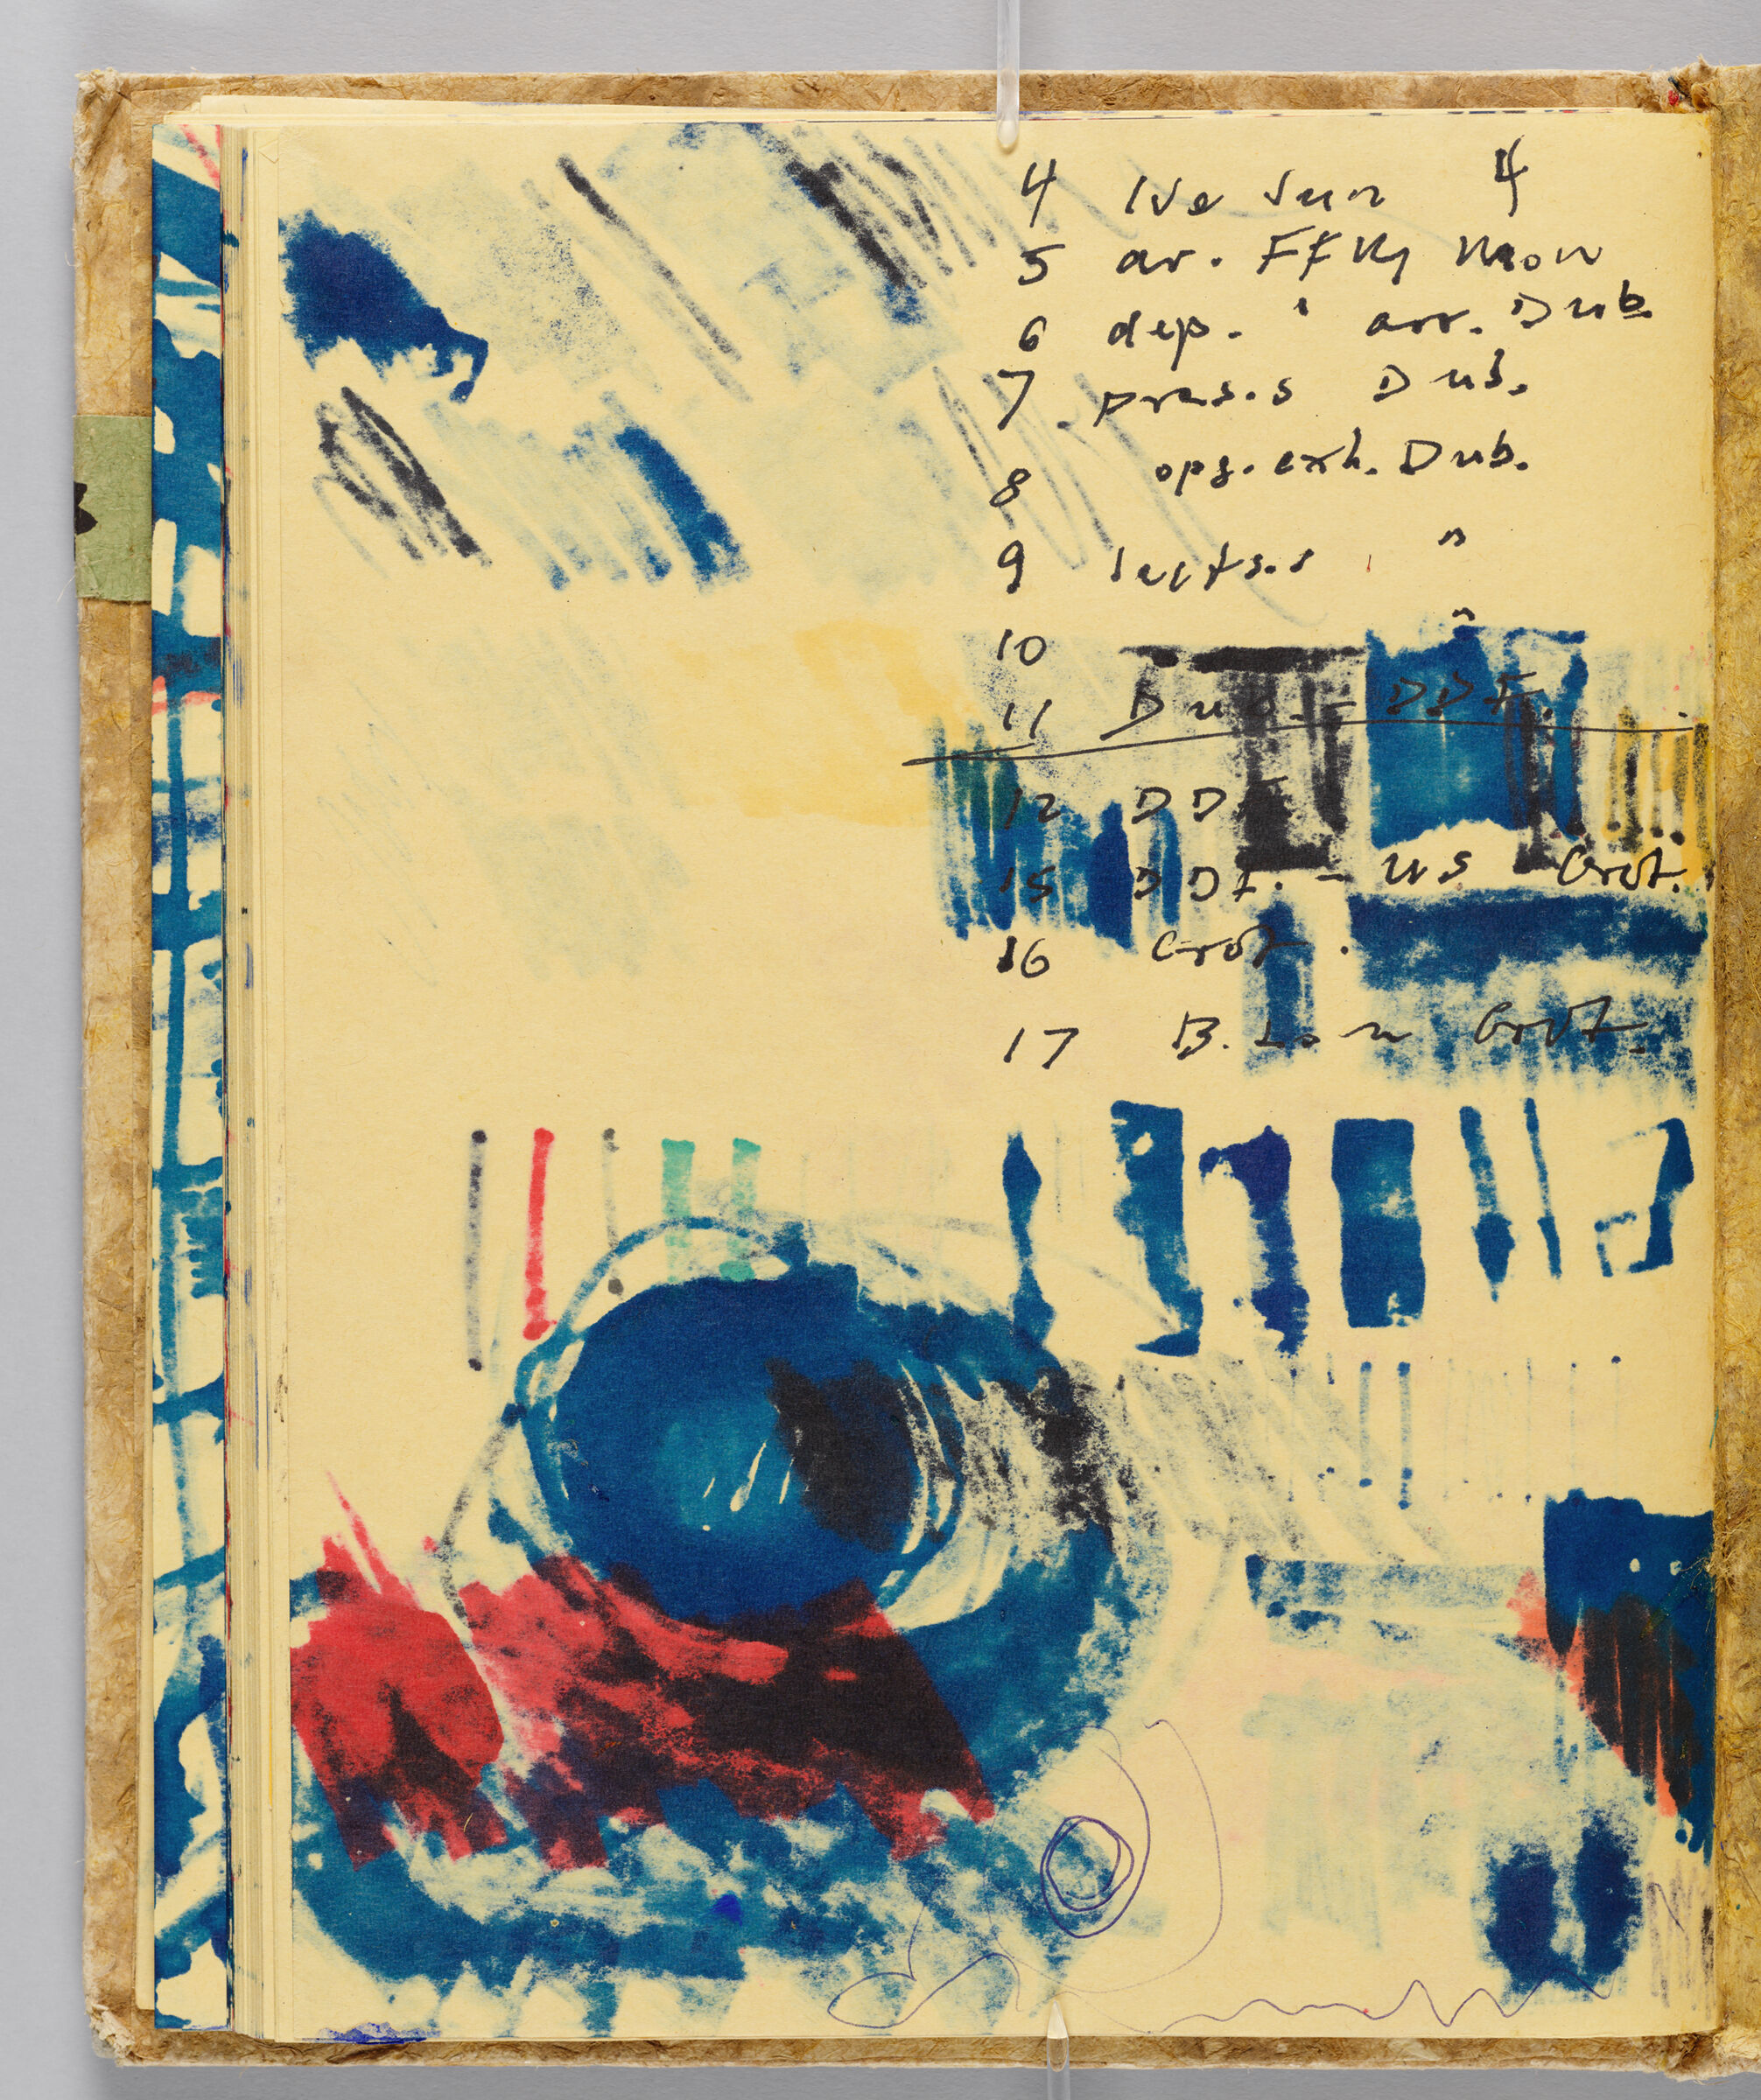 Untitled (Bleed-Through Of Previous Page With Handwritten Schedule, Left Page); Untitled (Back Endpaper With Color Transfer And Stray Marks, Right Page)